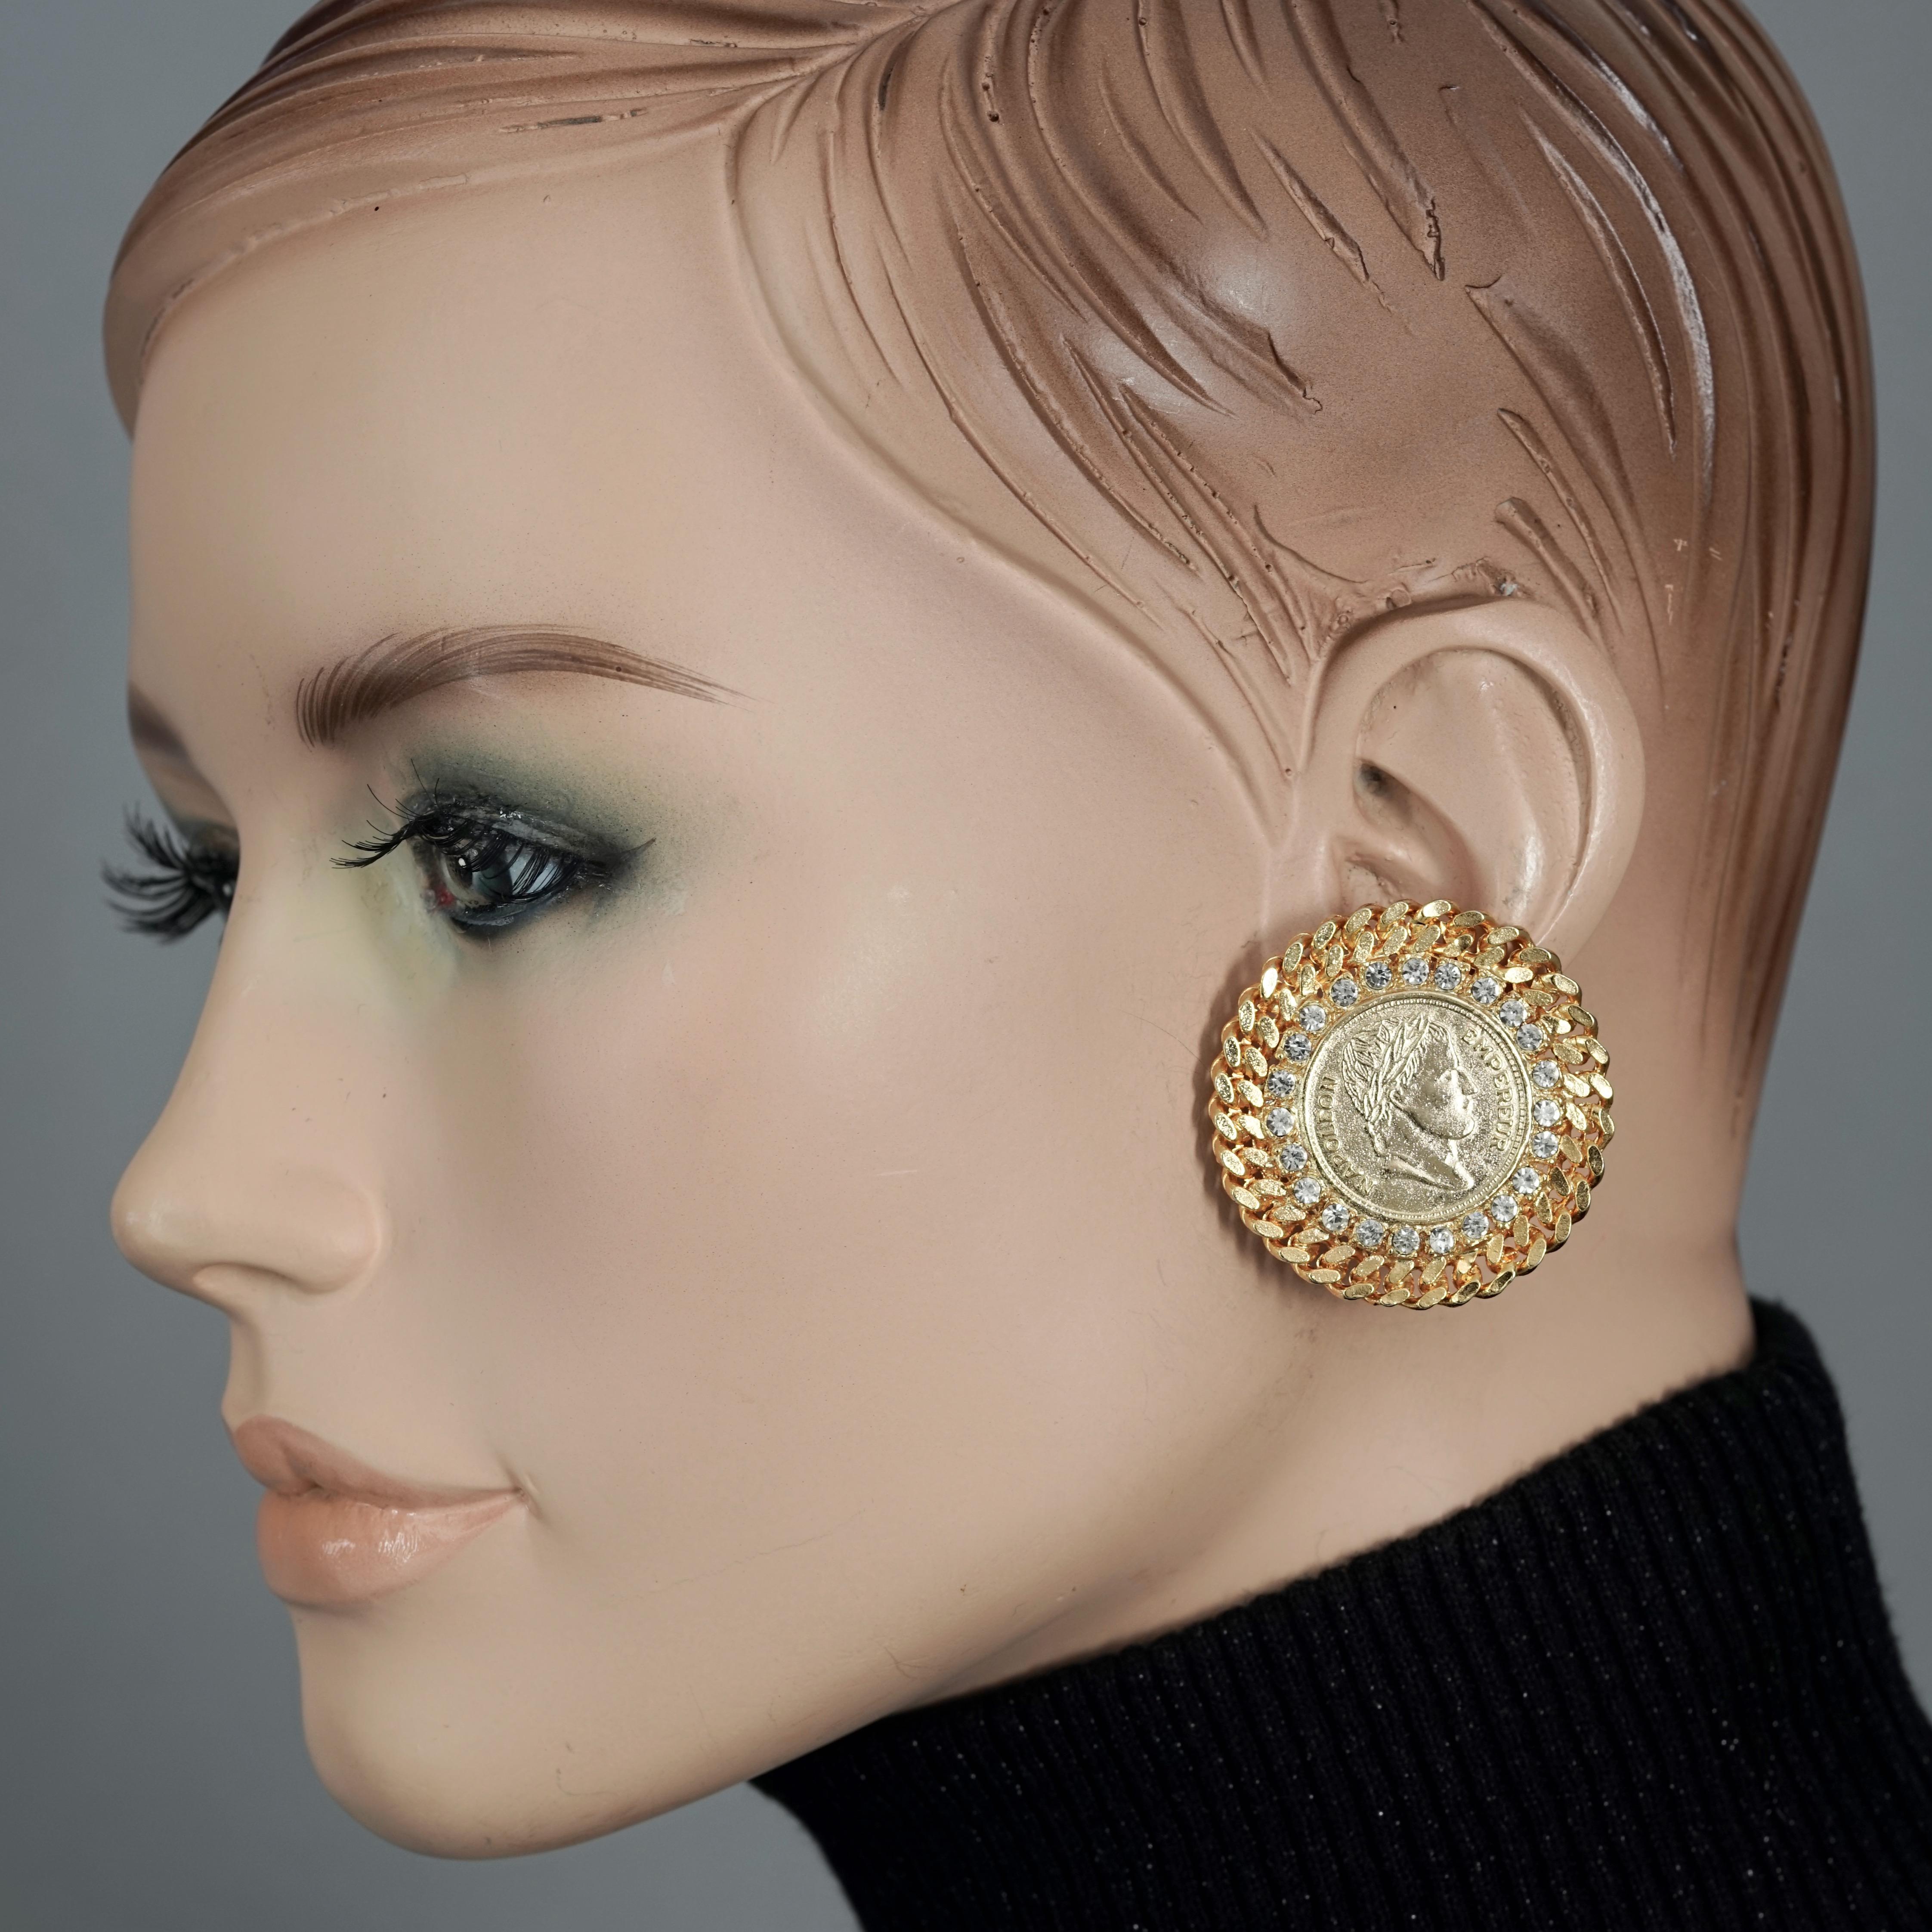 Vintage French EMPEROR NAPOLEON Coin Disc Rhinestone Earrings

Measurements:
Height: 1.57 inches (4 cm)
Width: 1.57 inches (4 cm)
Weight per Earring: 12 grams

Features:
- French disc coin earrings depicting Emperor Napoleon (Empereur Napoleon).
-